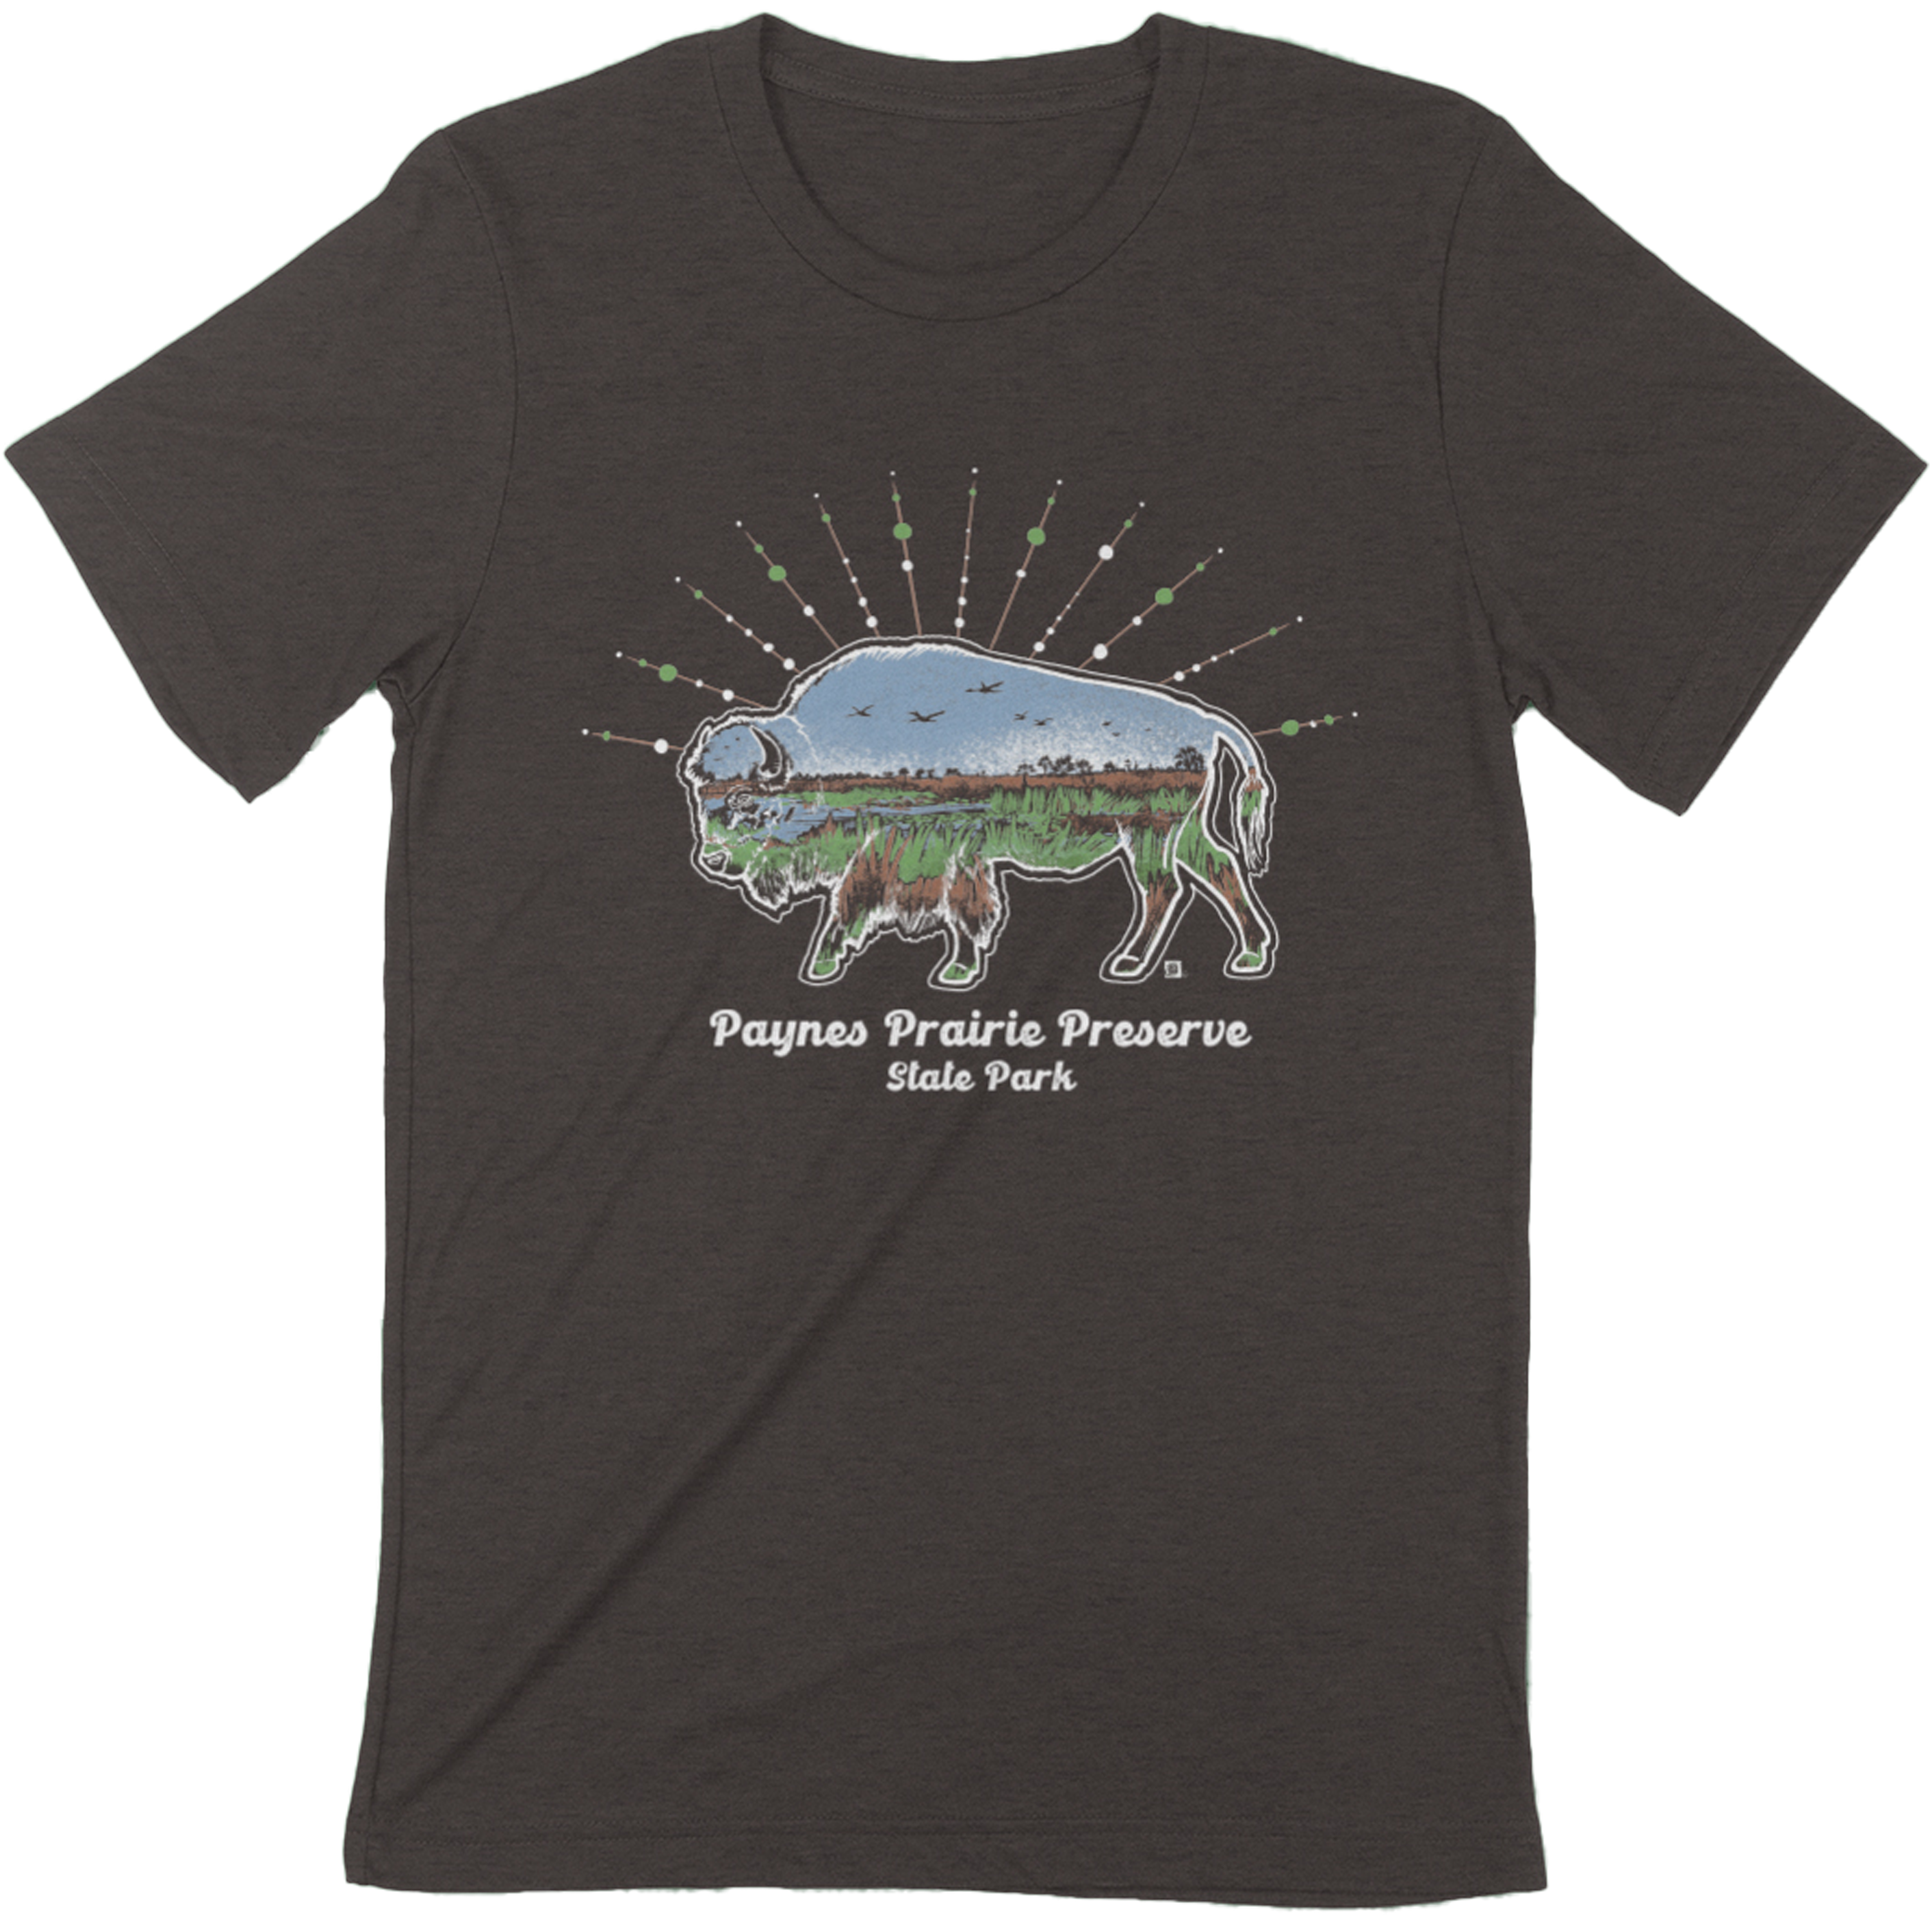 of Paynes Prairie Inc. - Online store product